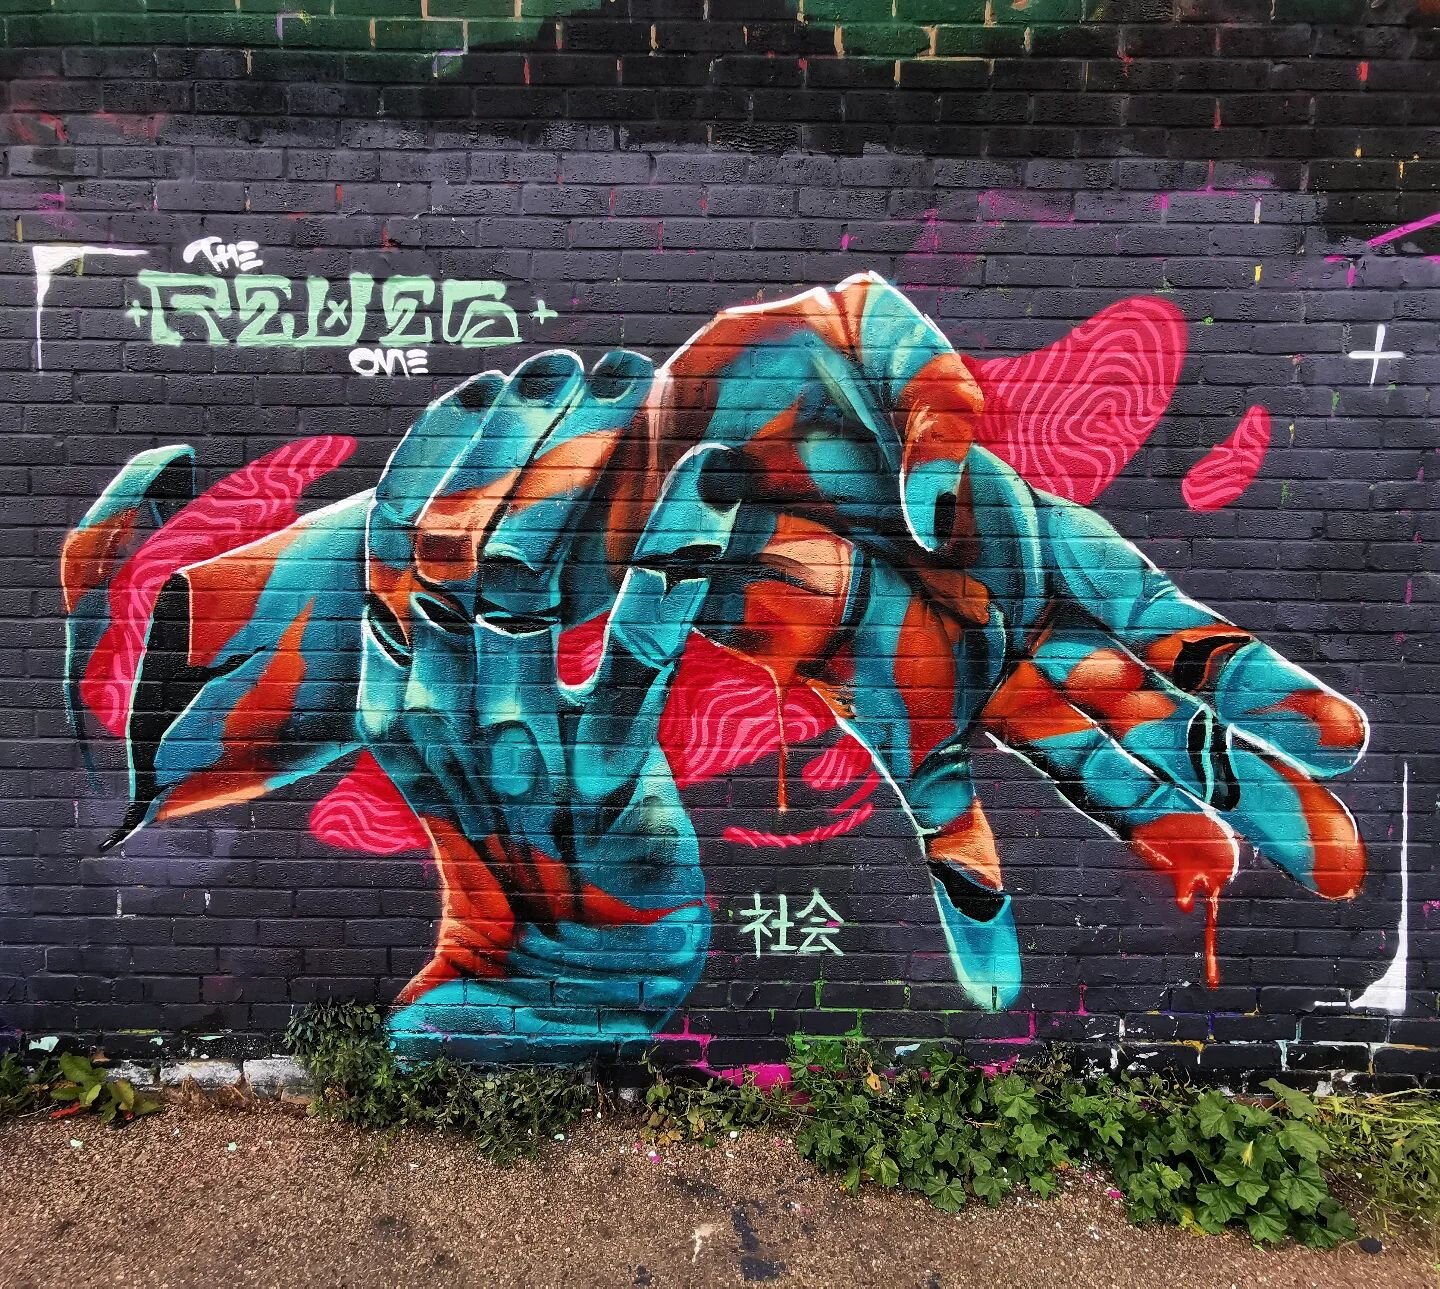 One wall I did in Leicester while visiting all the amazing artists at @bring_the_paint 

#graffitiart #graffiti #graffart #streetart #streetstyle #streetartistry #bringthepaint #wallart #muralart #mural #jj_urbanart #drawing #sprayart #surrealism #se